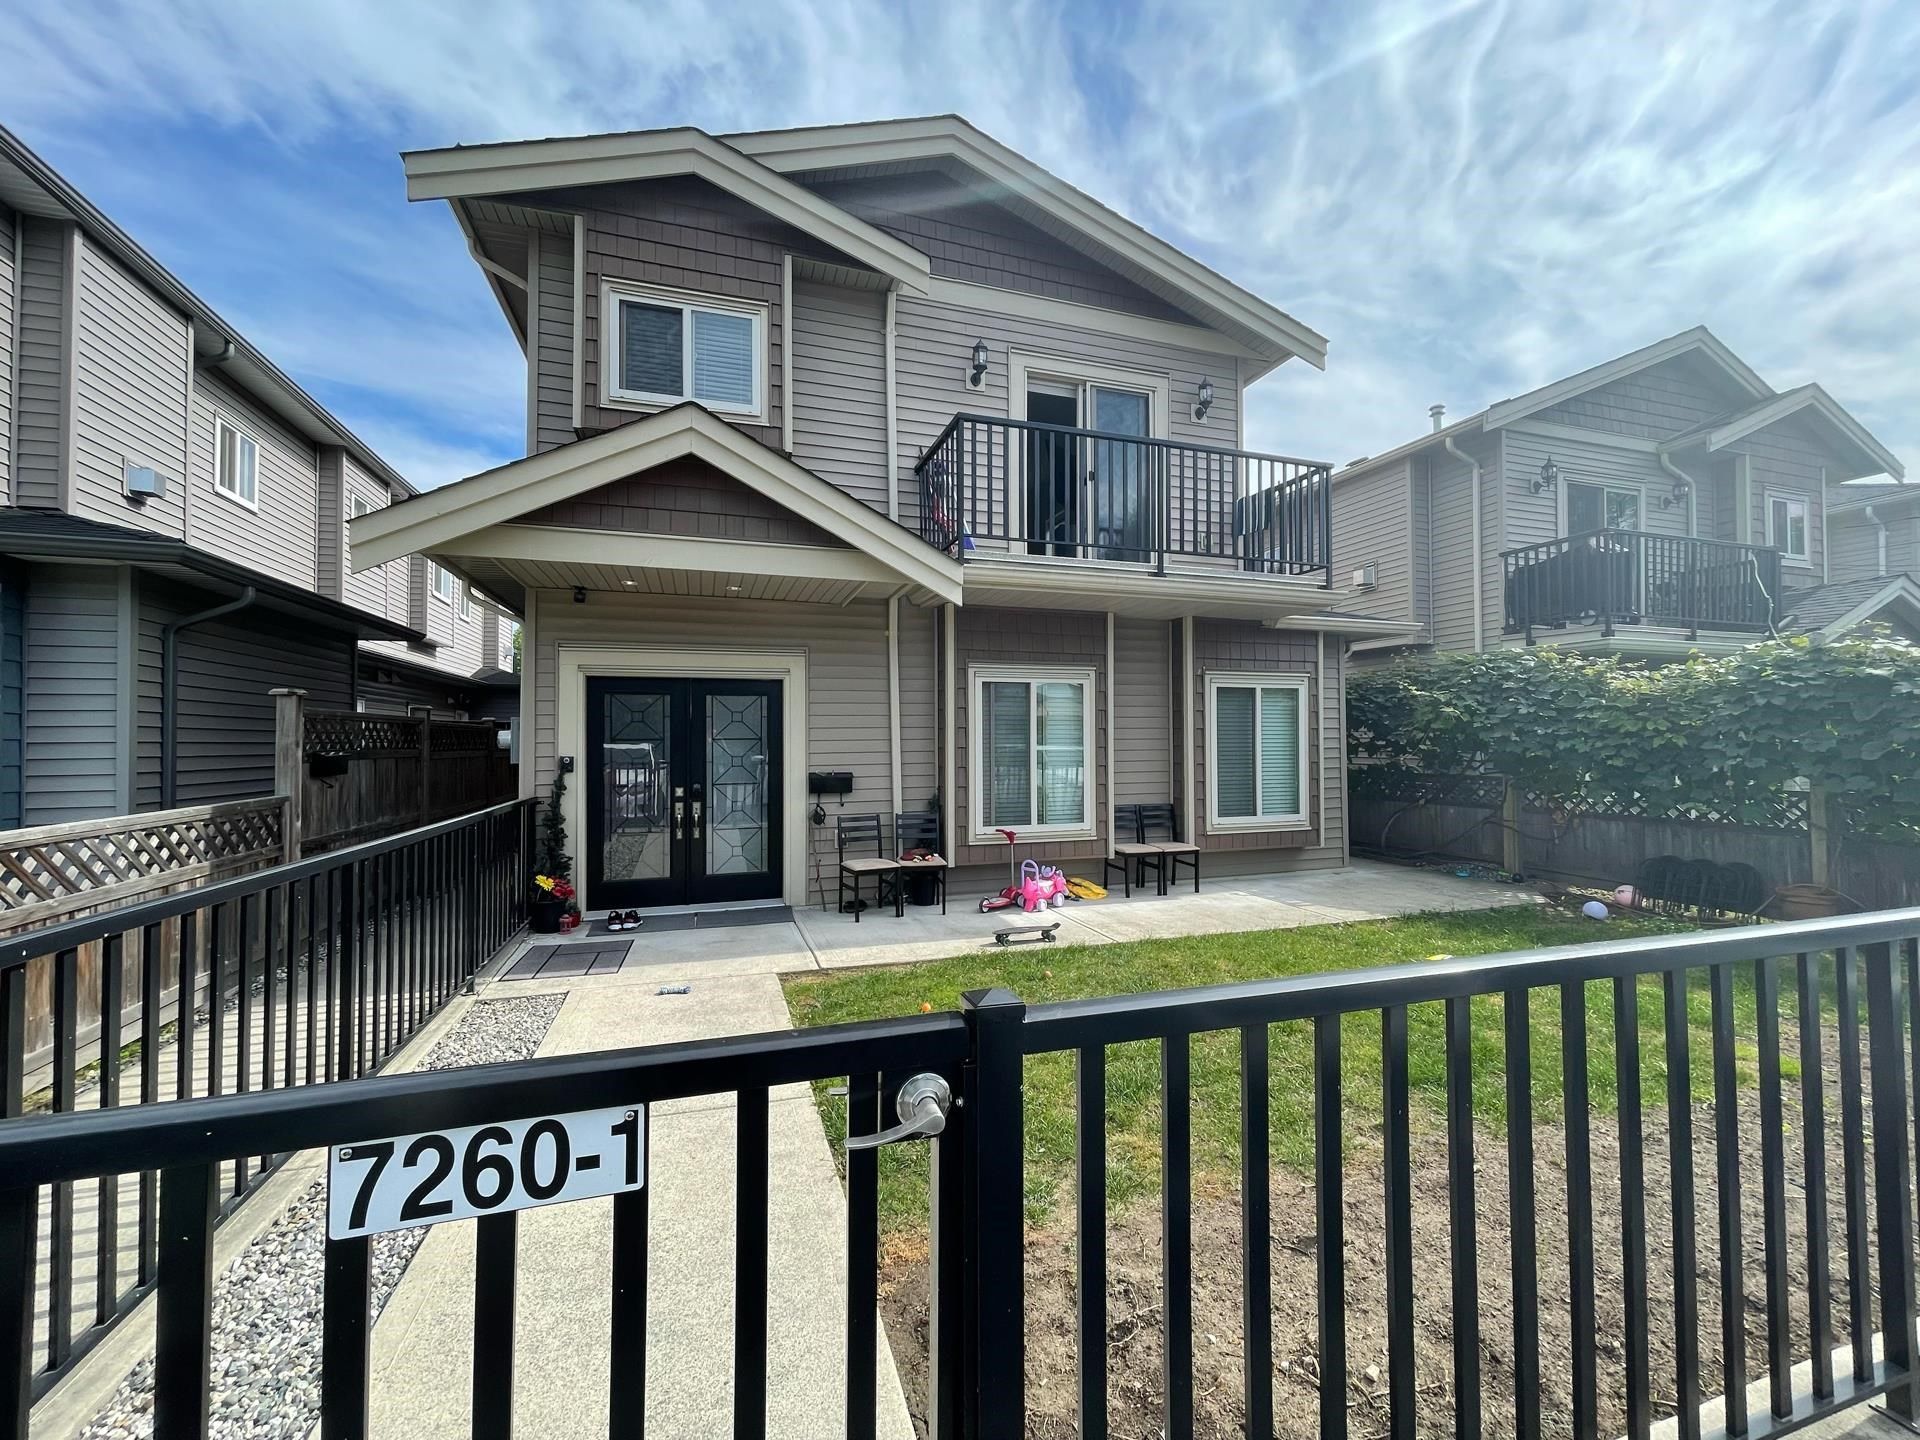 Main Photo: 1 7260 11TH Avenue in Burnaby: Edmonds BE 1/2 Duplex for sale (Burnaby East)  : MLS®# R2612767